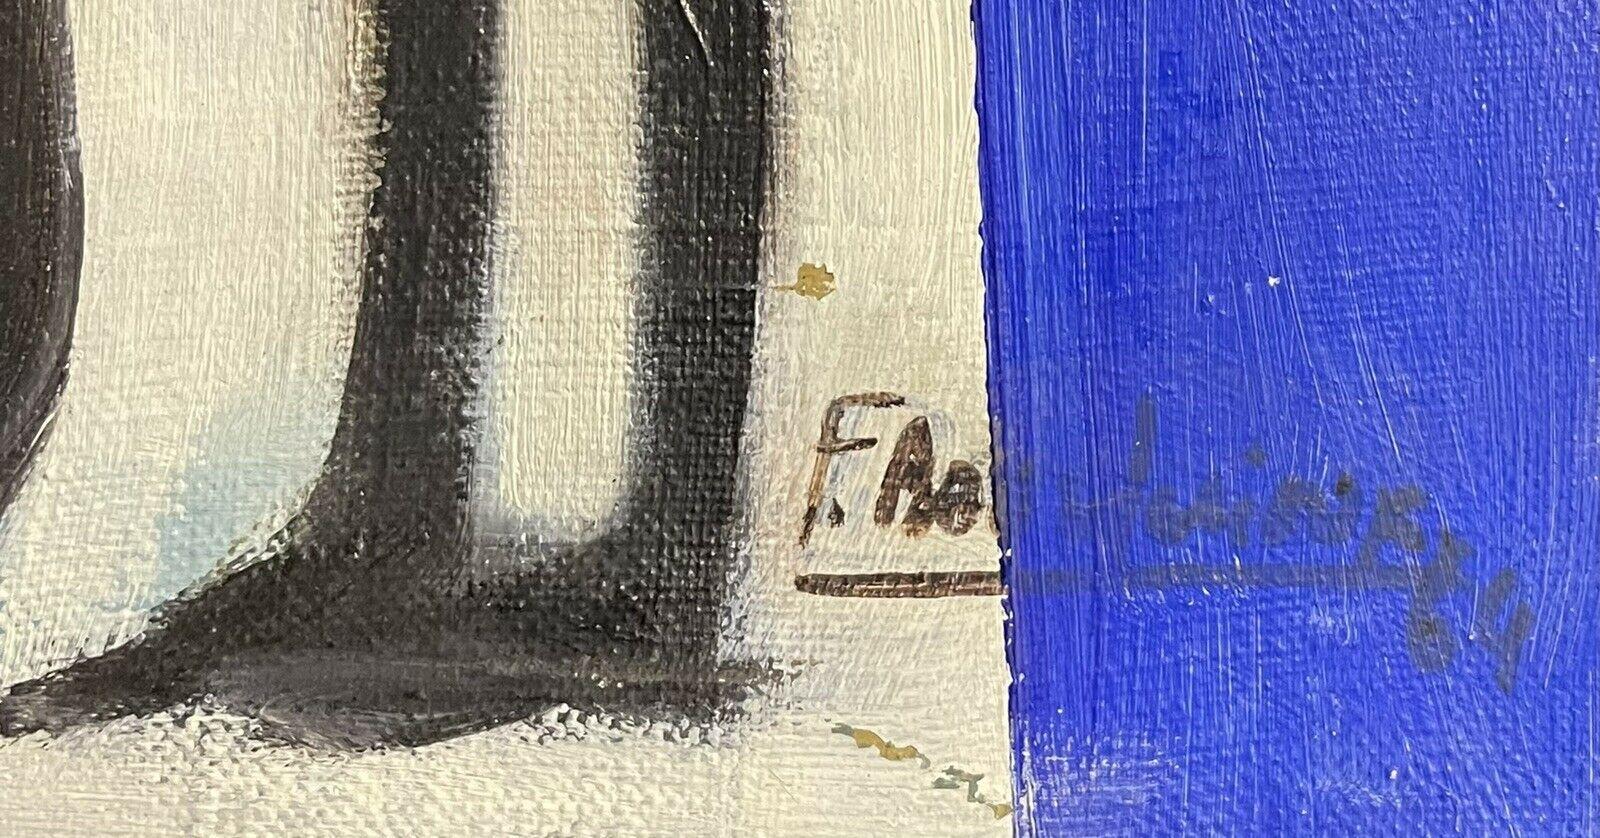 Artist/ School: French School, signed and dated 1960's

Title: Abstract/ Cubist depiction of three figures in conversation, against a blue background.

Medium: oil painting on canvas

Size:  painting: 23.75  x 16 inches

Provenance: private